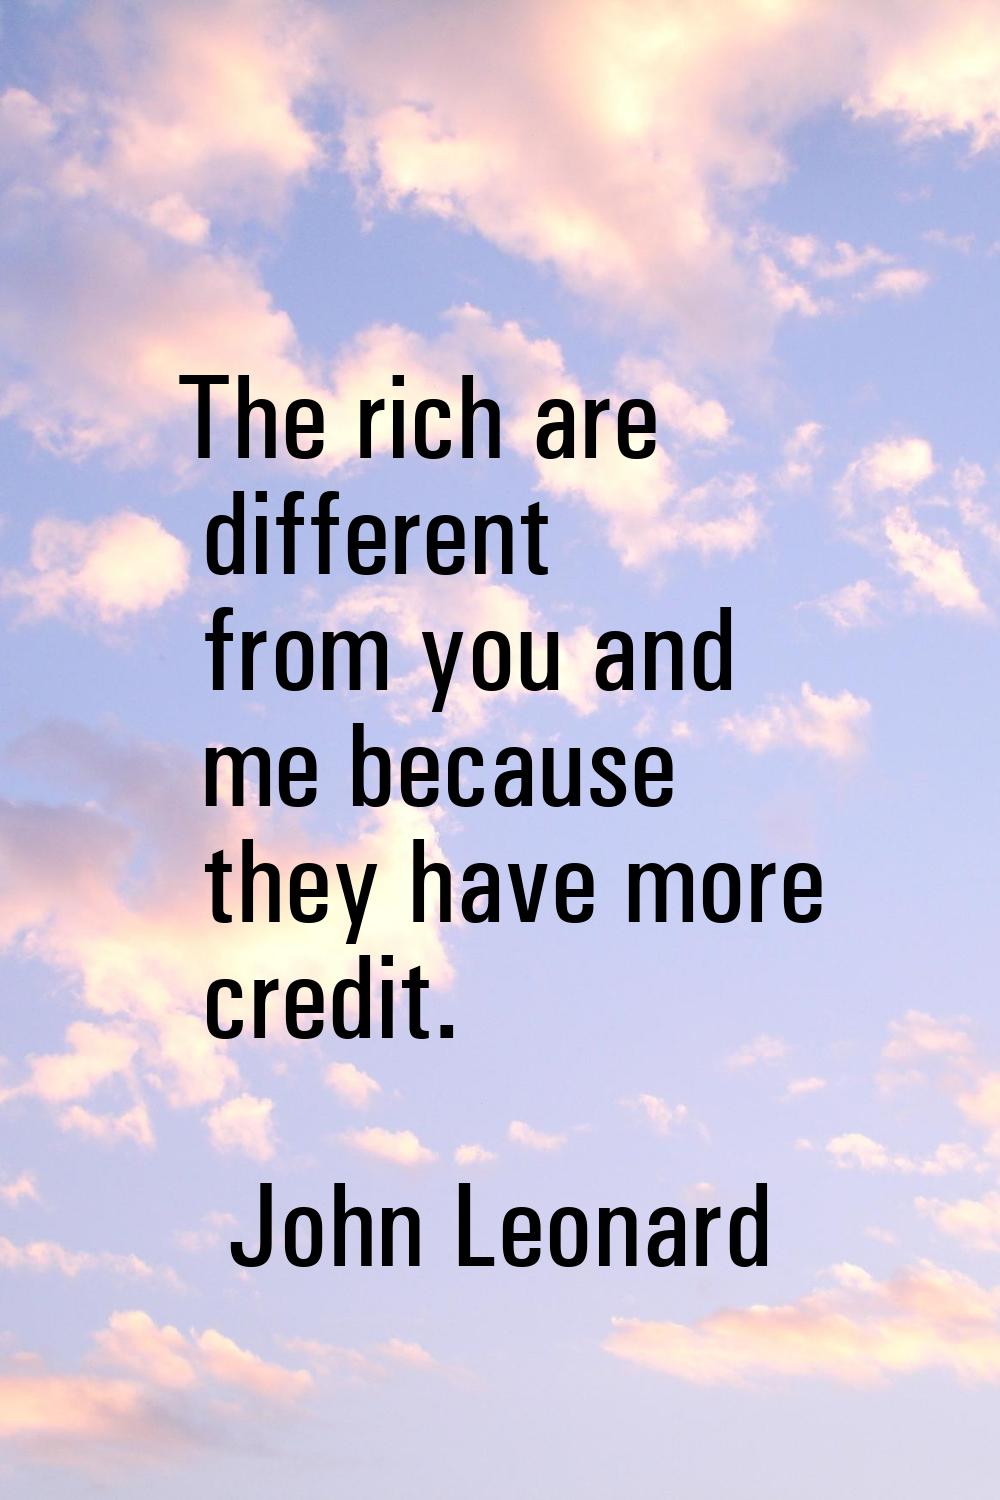 The rich are different from you and me because they have more credit.